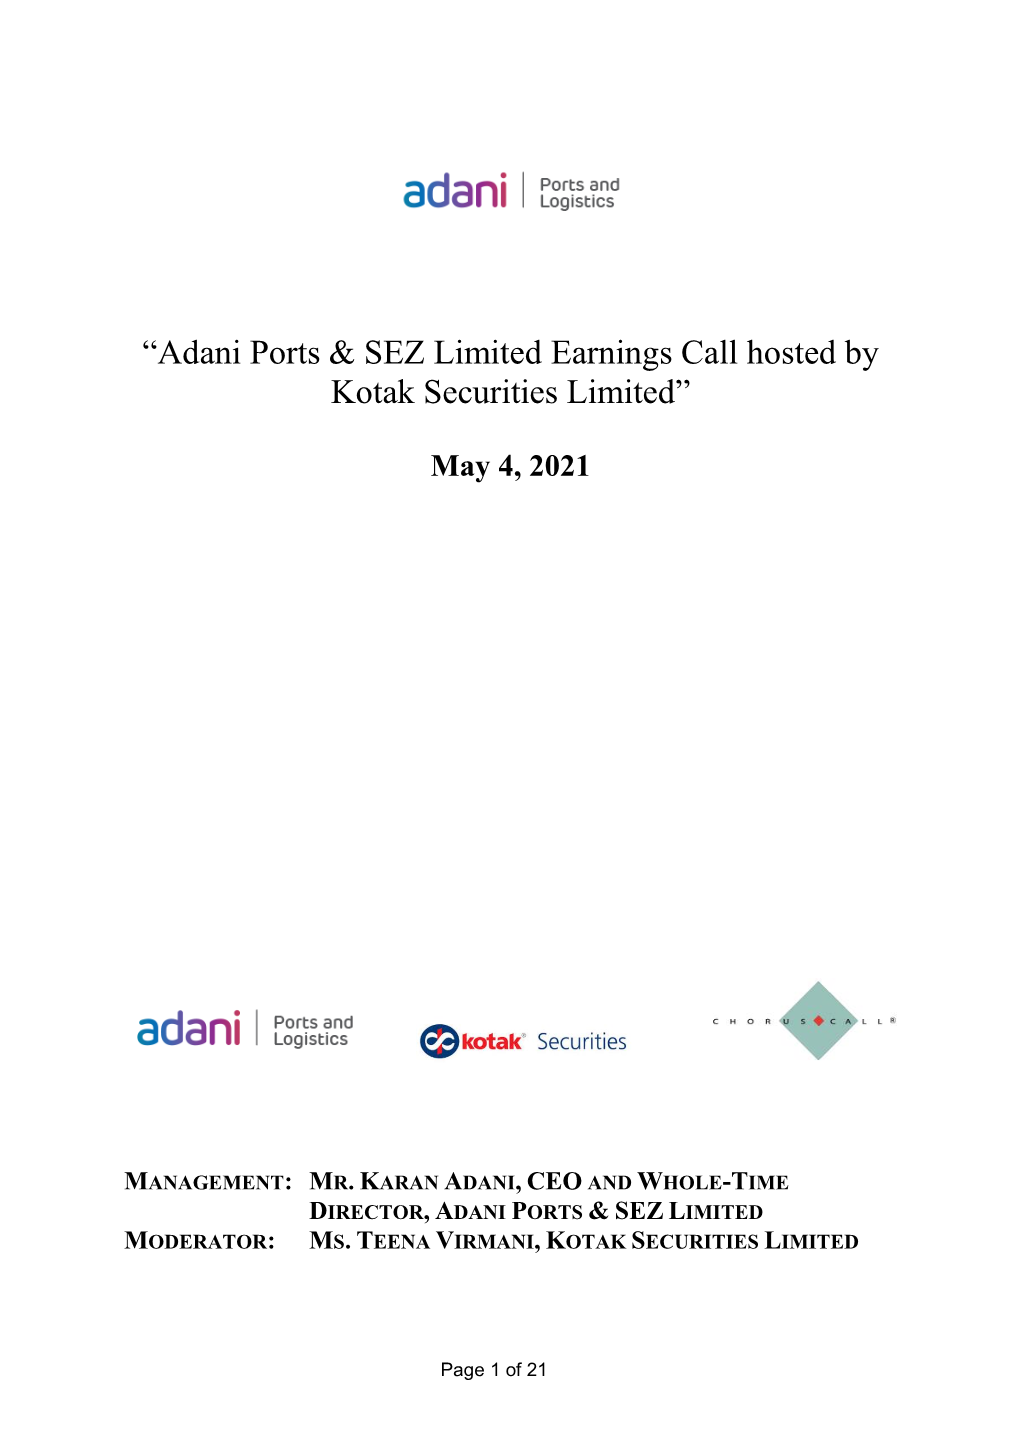 “Adani Ports & SEZ Limited Earnings Call Hosted by Kotak Securities